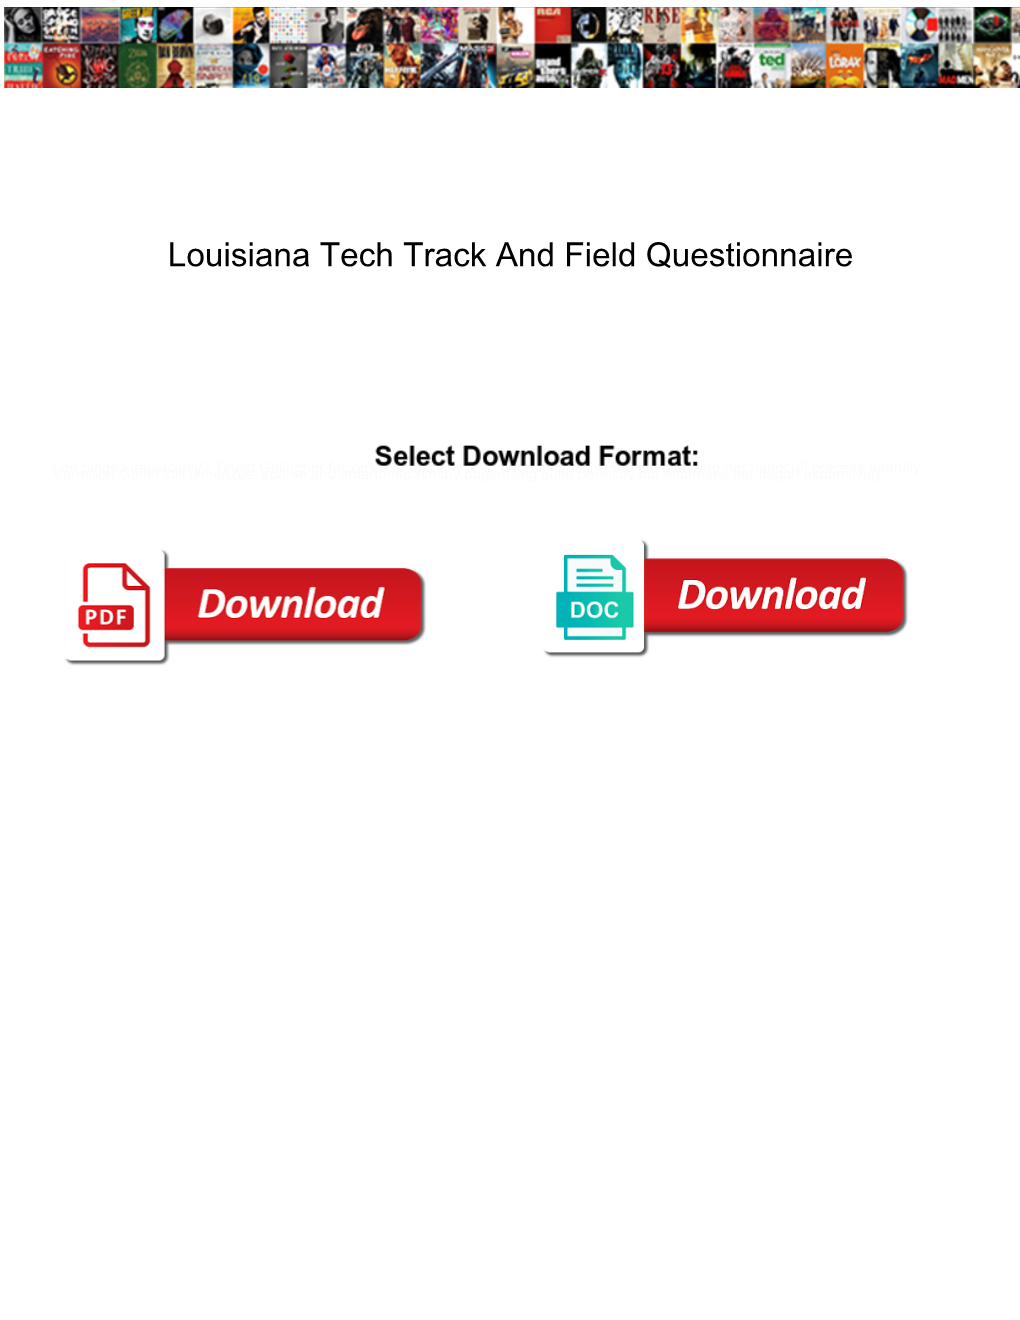 Louisiana Tech Track and Field Questionnaire